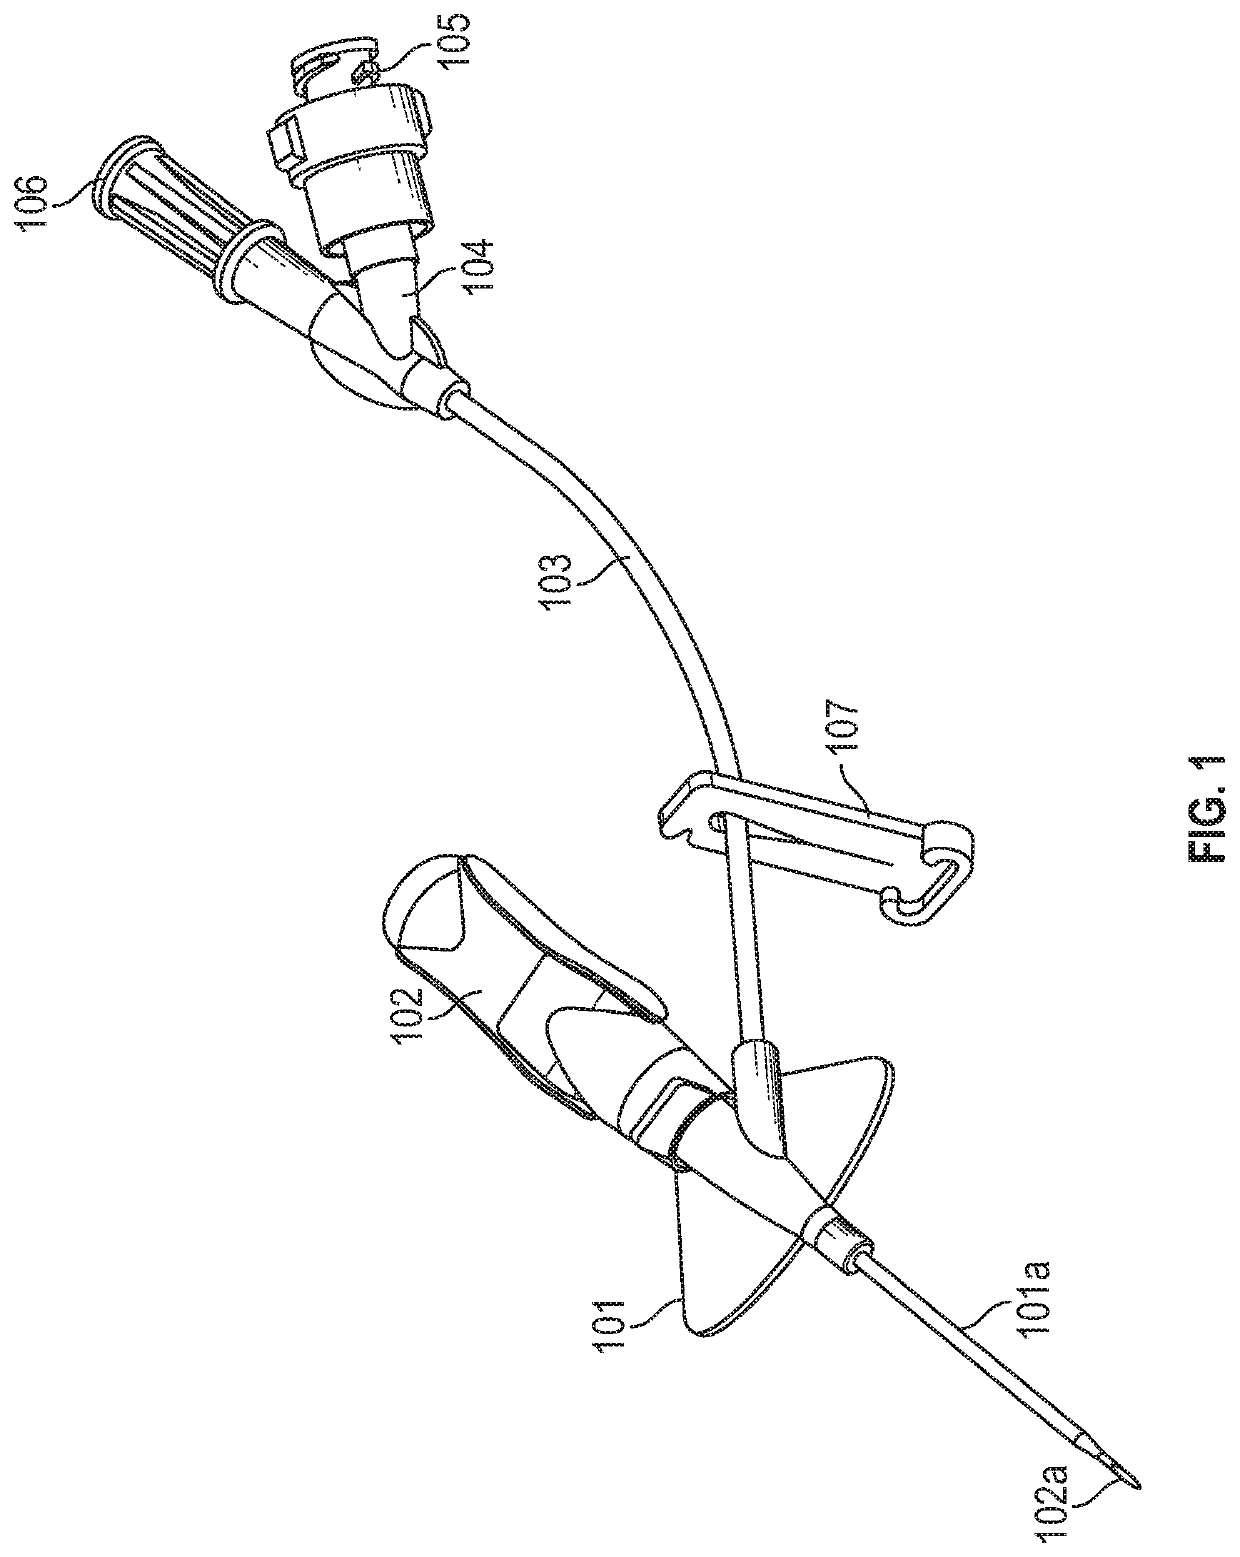 Closed IV access device with paddle grip needle hub and flash chamber